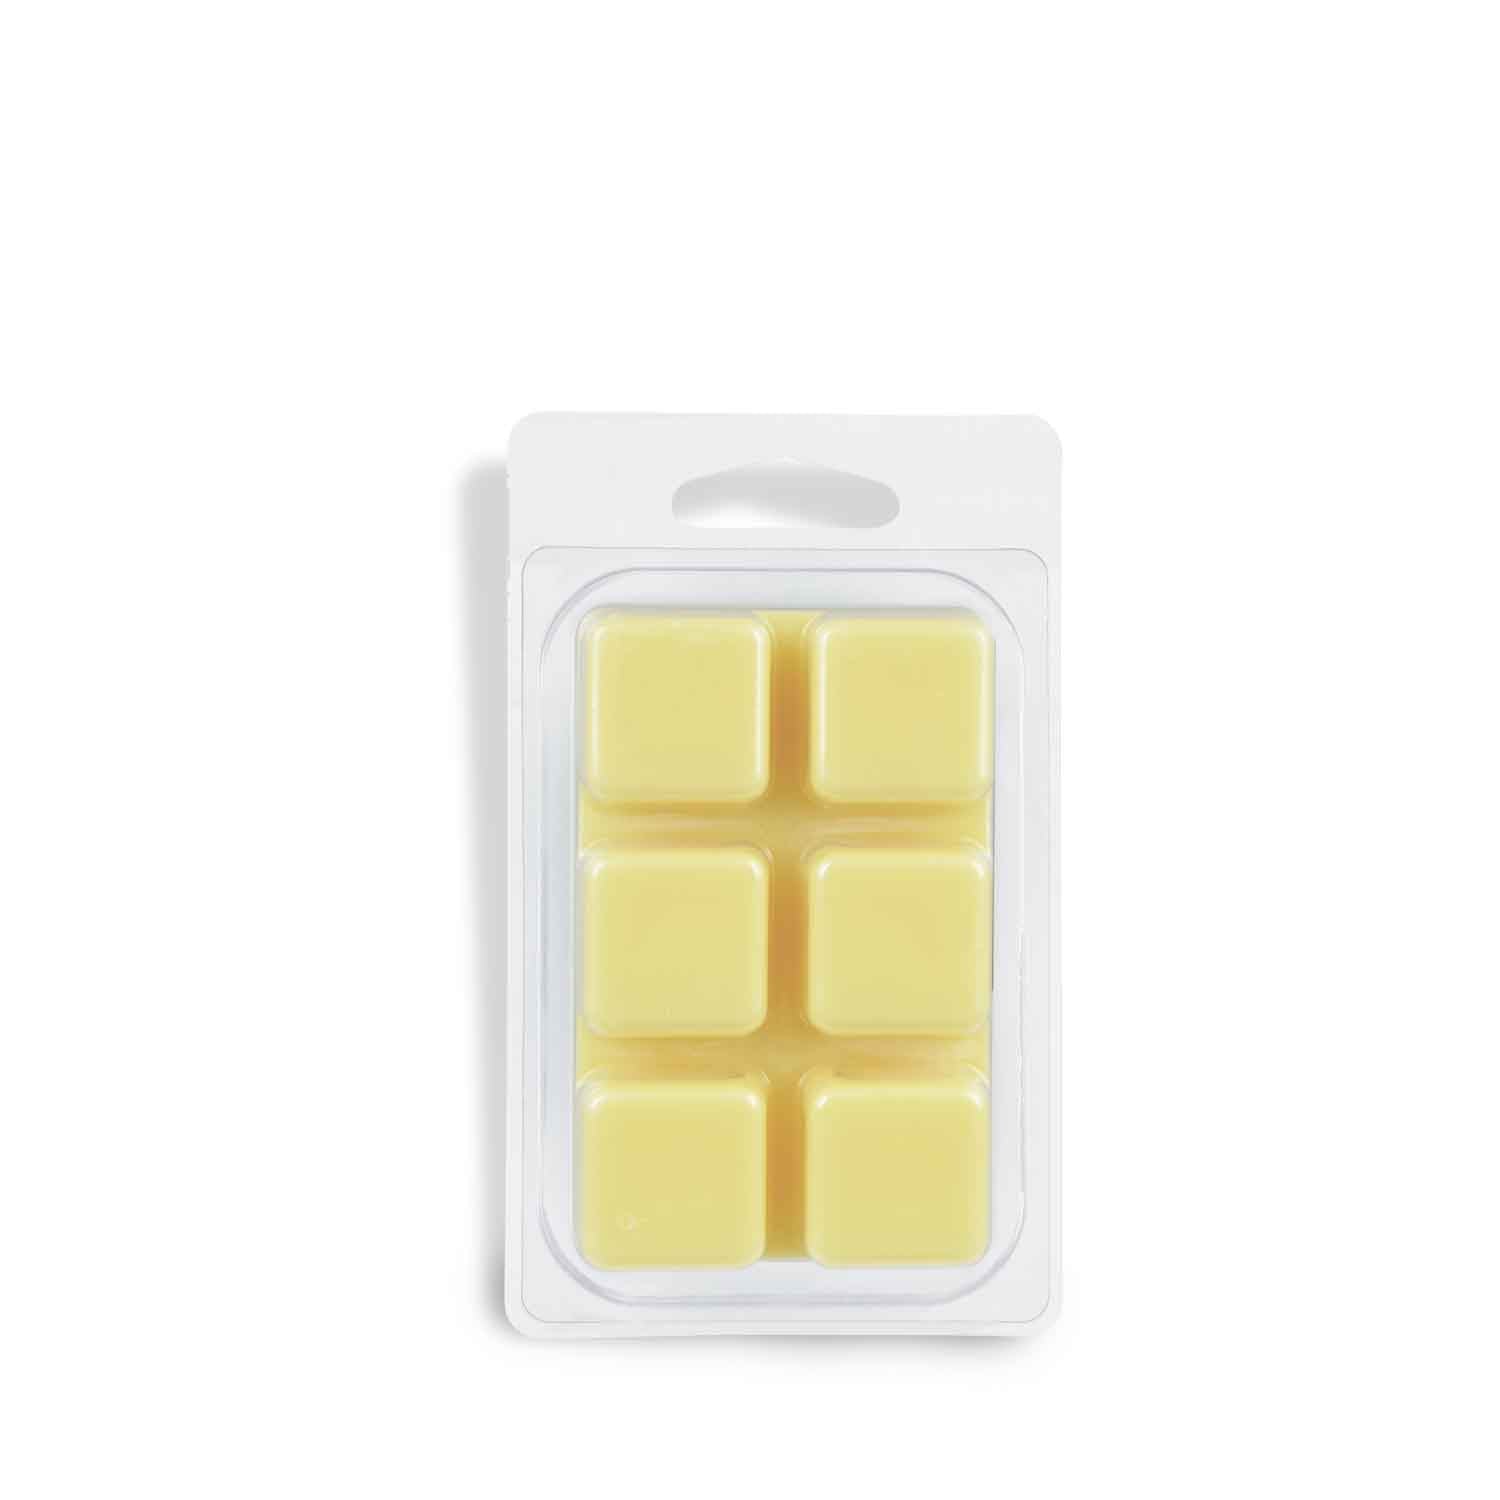 Soy Wax Melt Snap Bars Highly Scented Wax Melts Vegan & Cruelty Free Wax  Melts Home Fragrance -  Israel